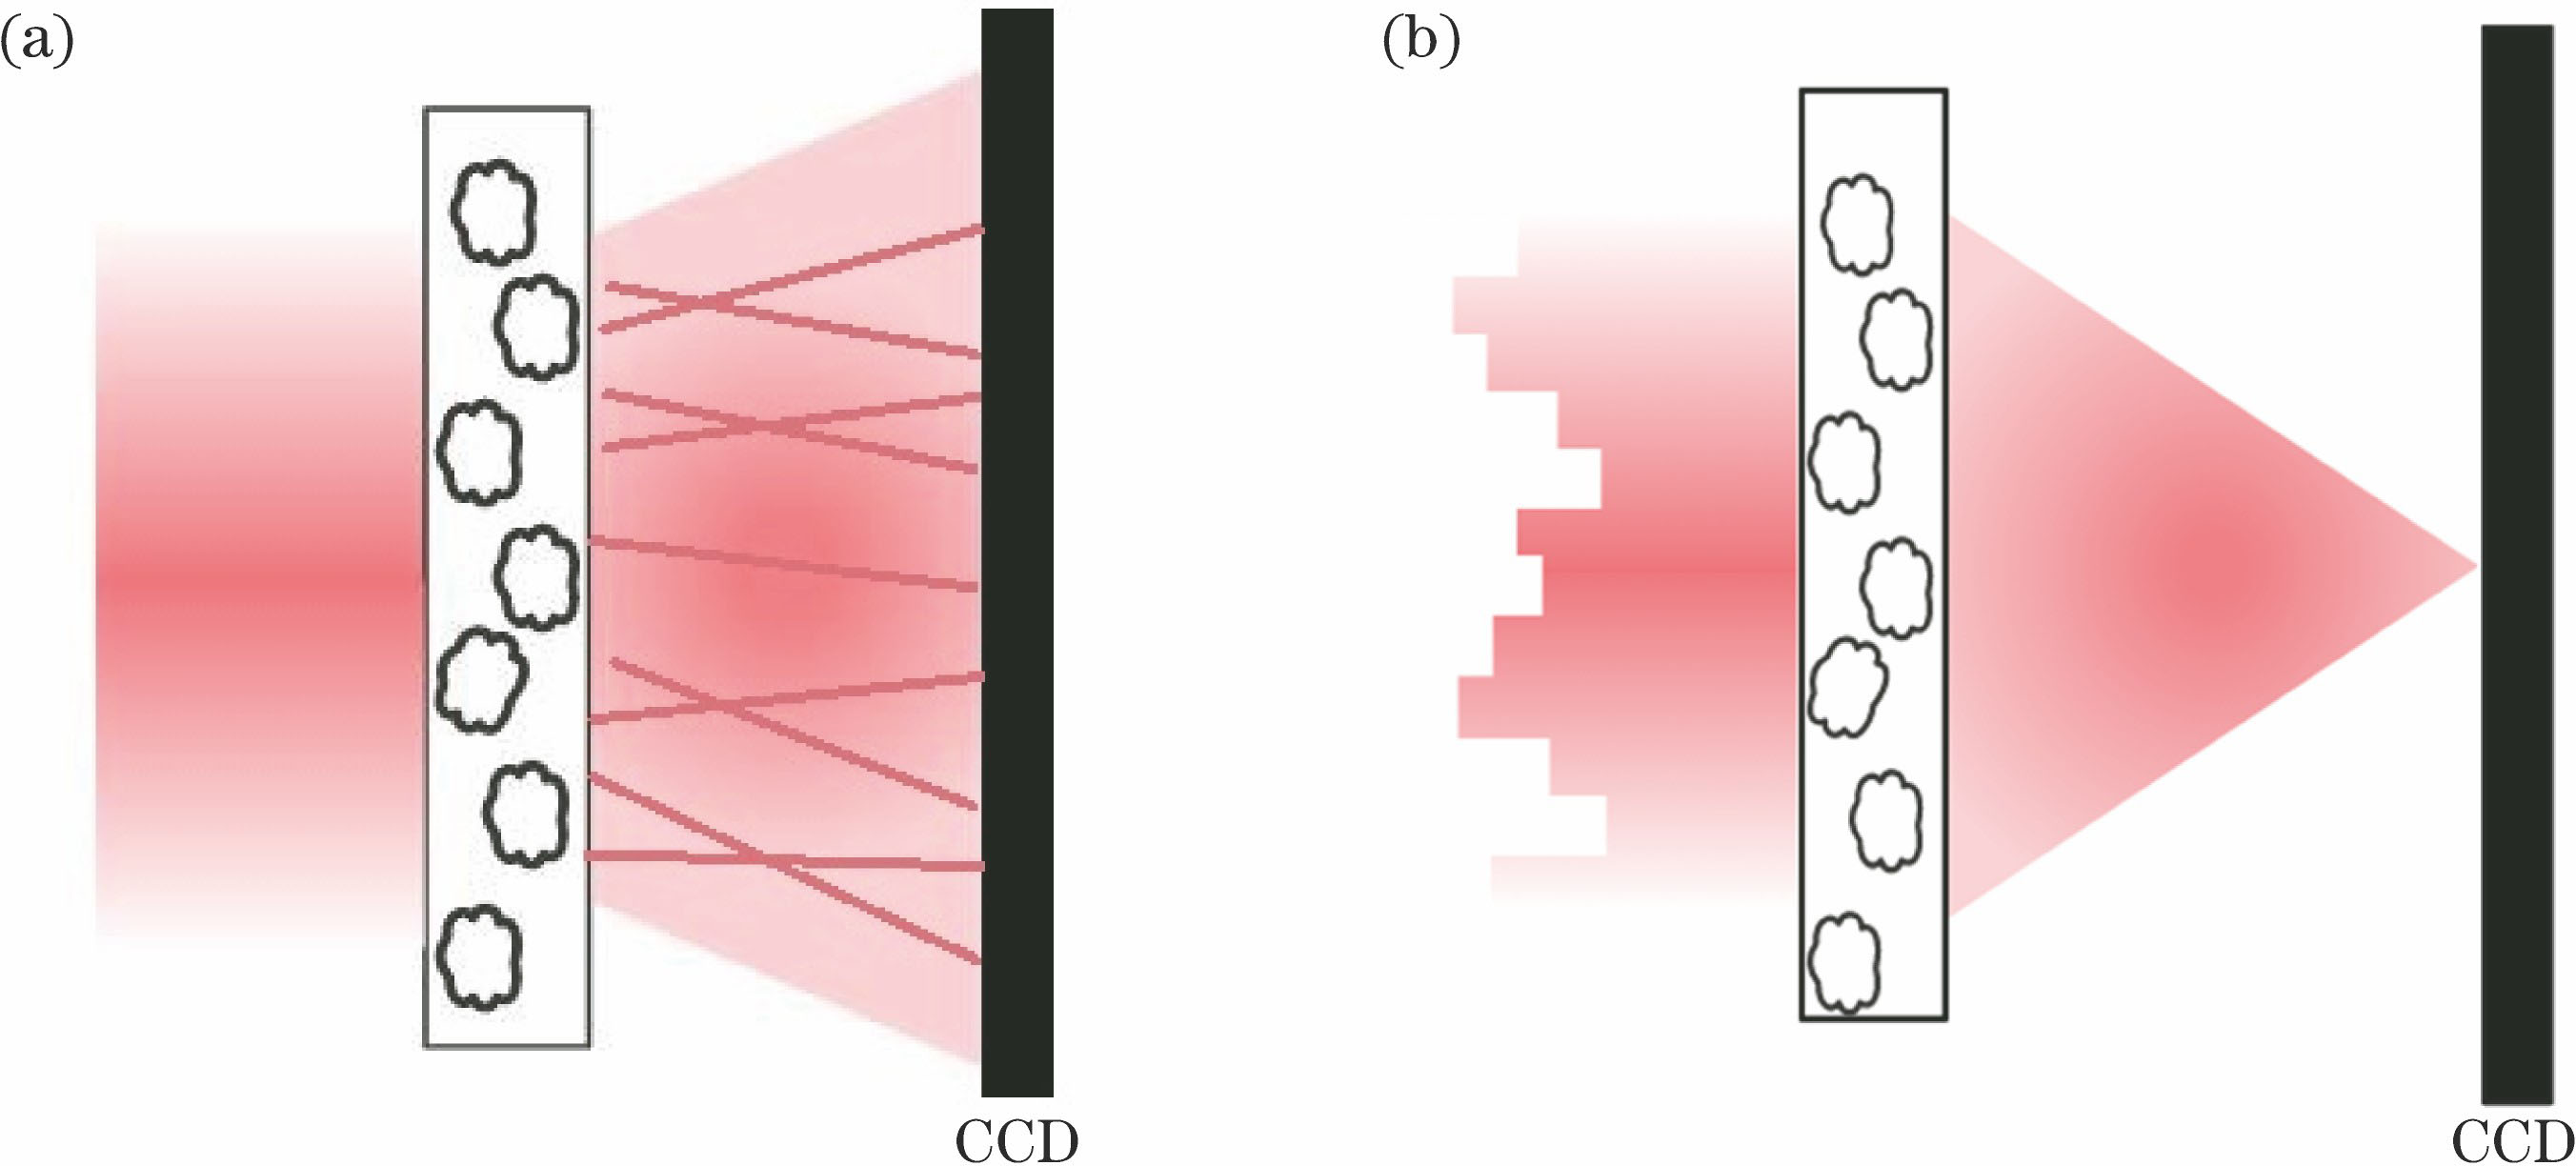 Schematics of focusing of incident laser after passing through scattering medium by modulating wavefront. (a) Random speckle formed by plane wave passing through scattering medium; (b) focal spot formed at specific position by modulated incident laser passing through scattering medium